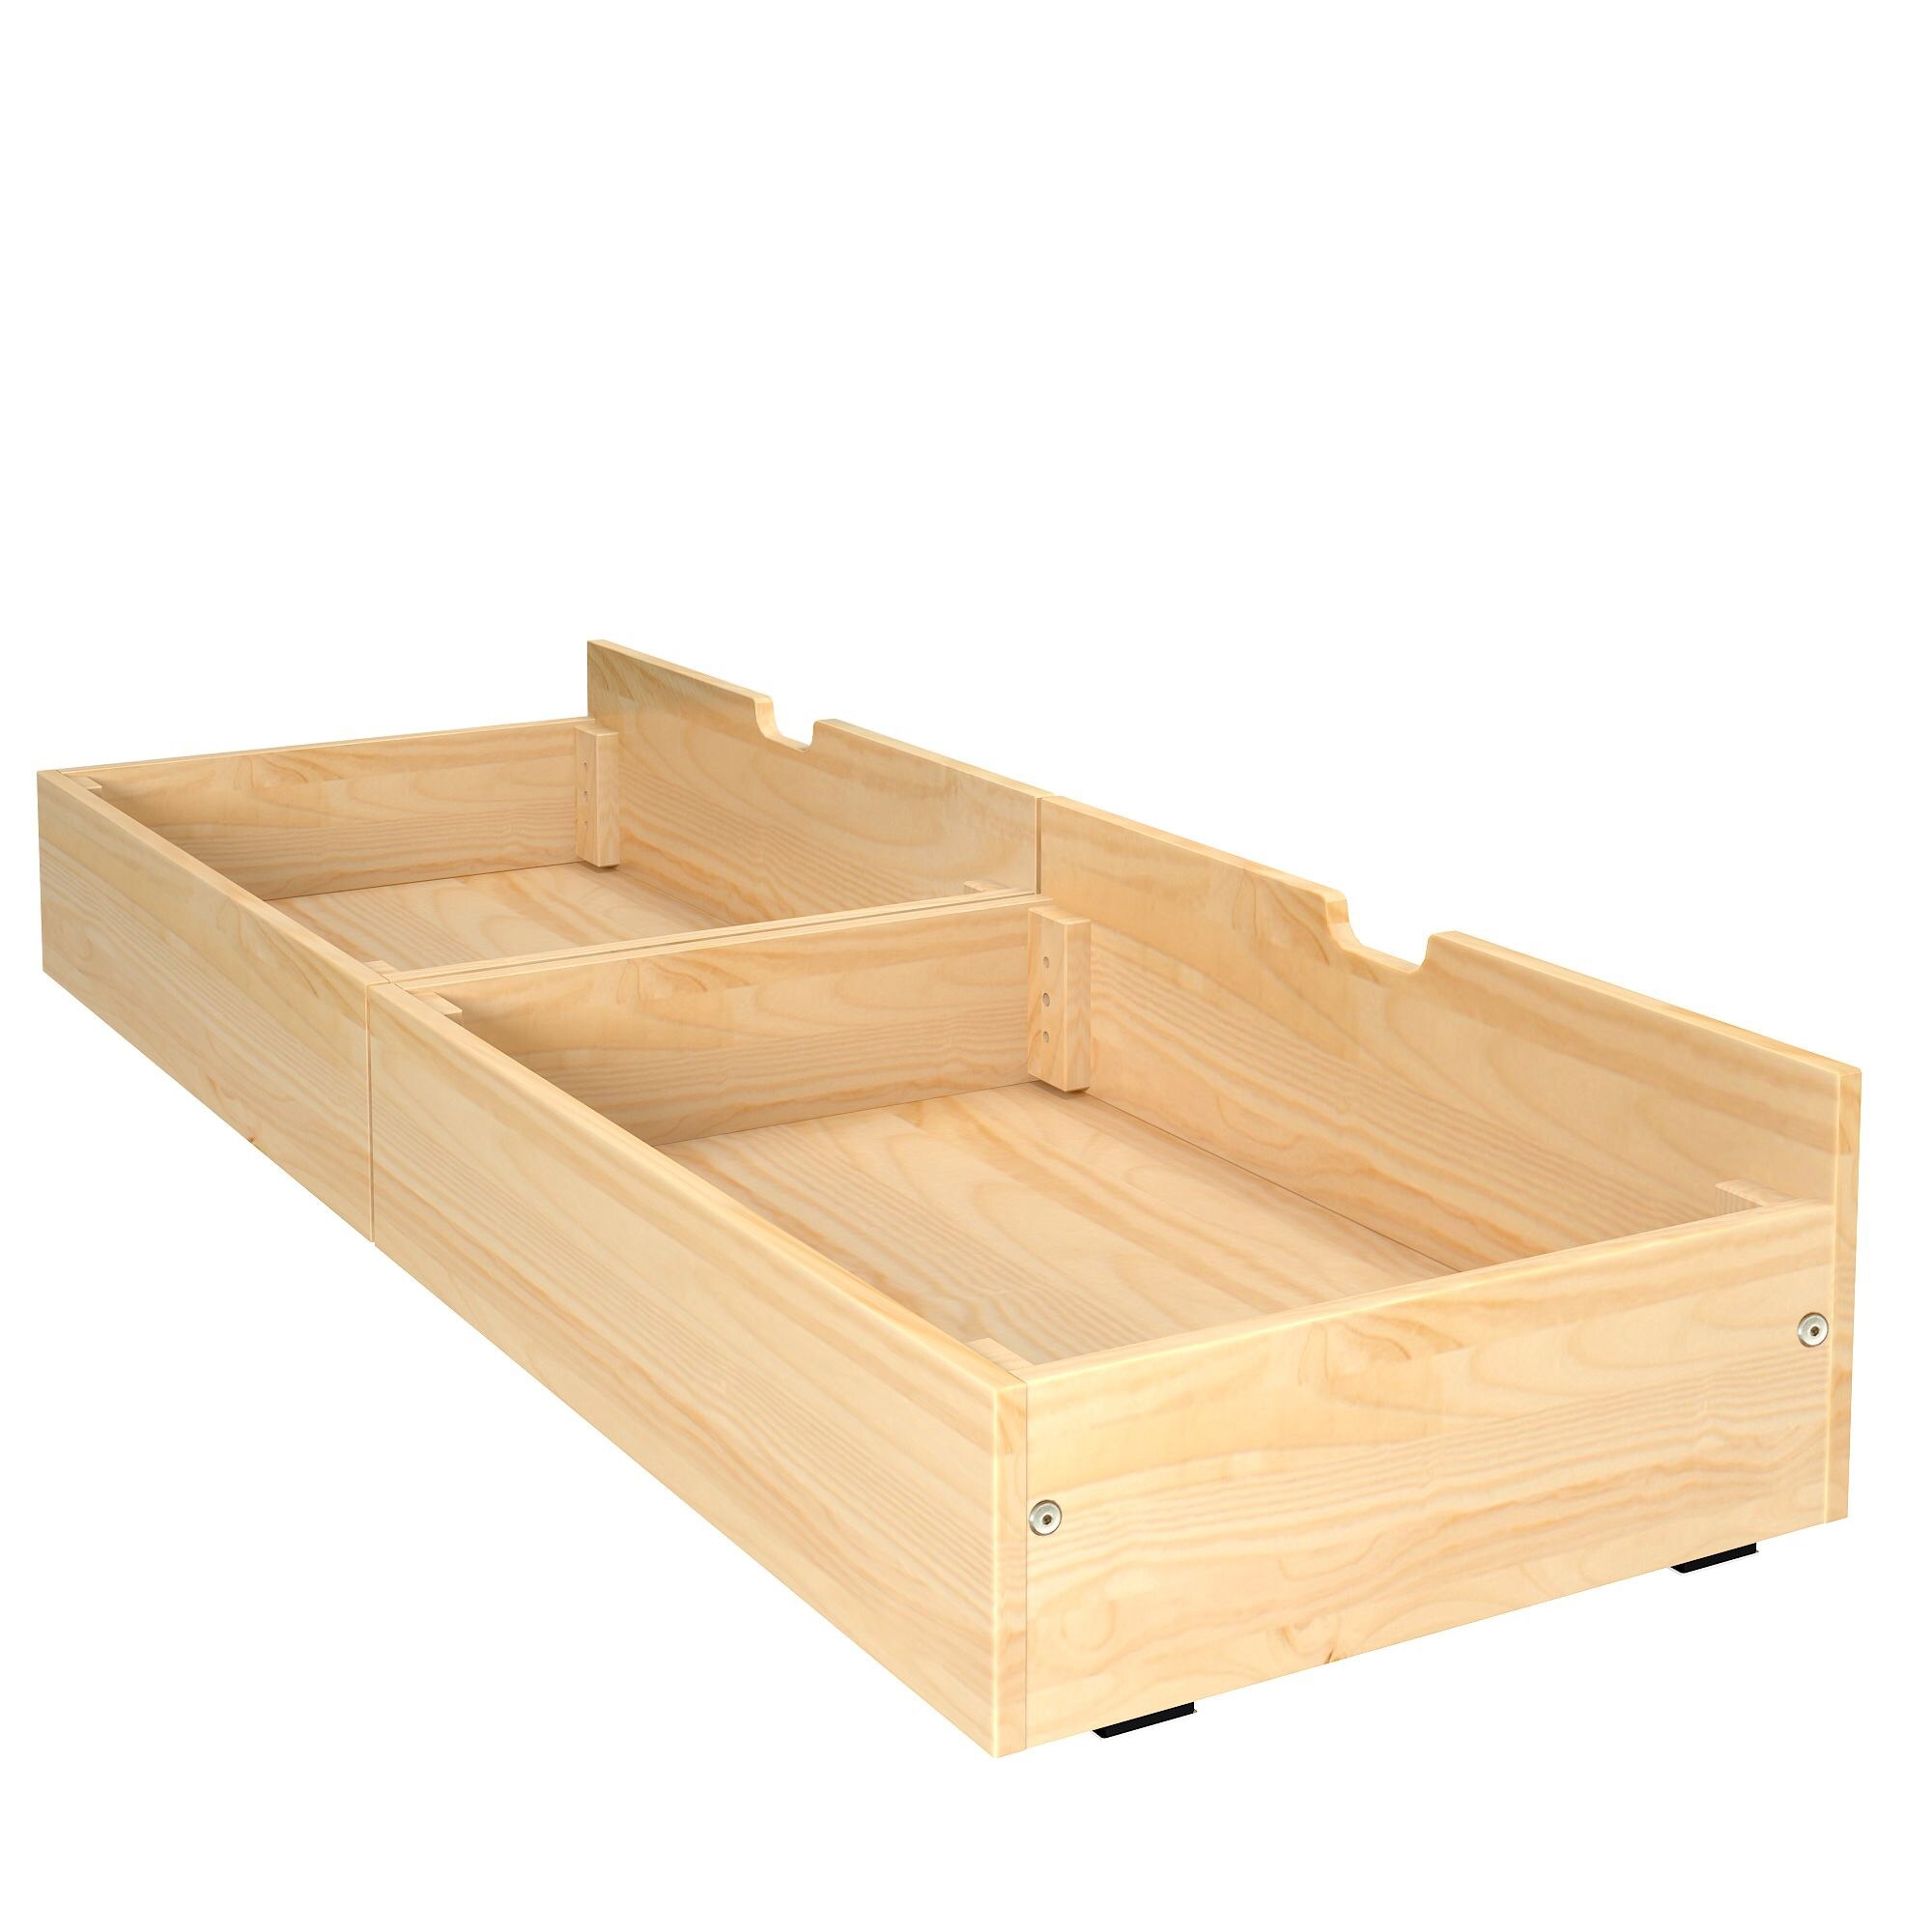 https://ak1.ostkcdn.com/images/products/is/images/direct/b2aa7e7e48789490c466dec49eed5e3cecb3cddb/Max-%26-Lily-Under-Bed-Storage-Drawers.jpg